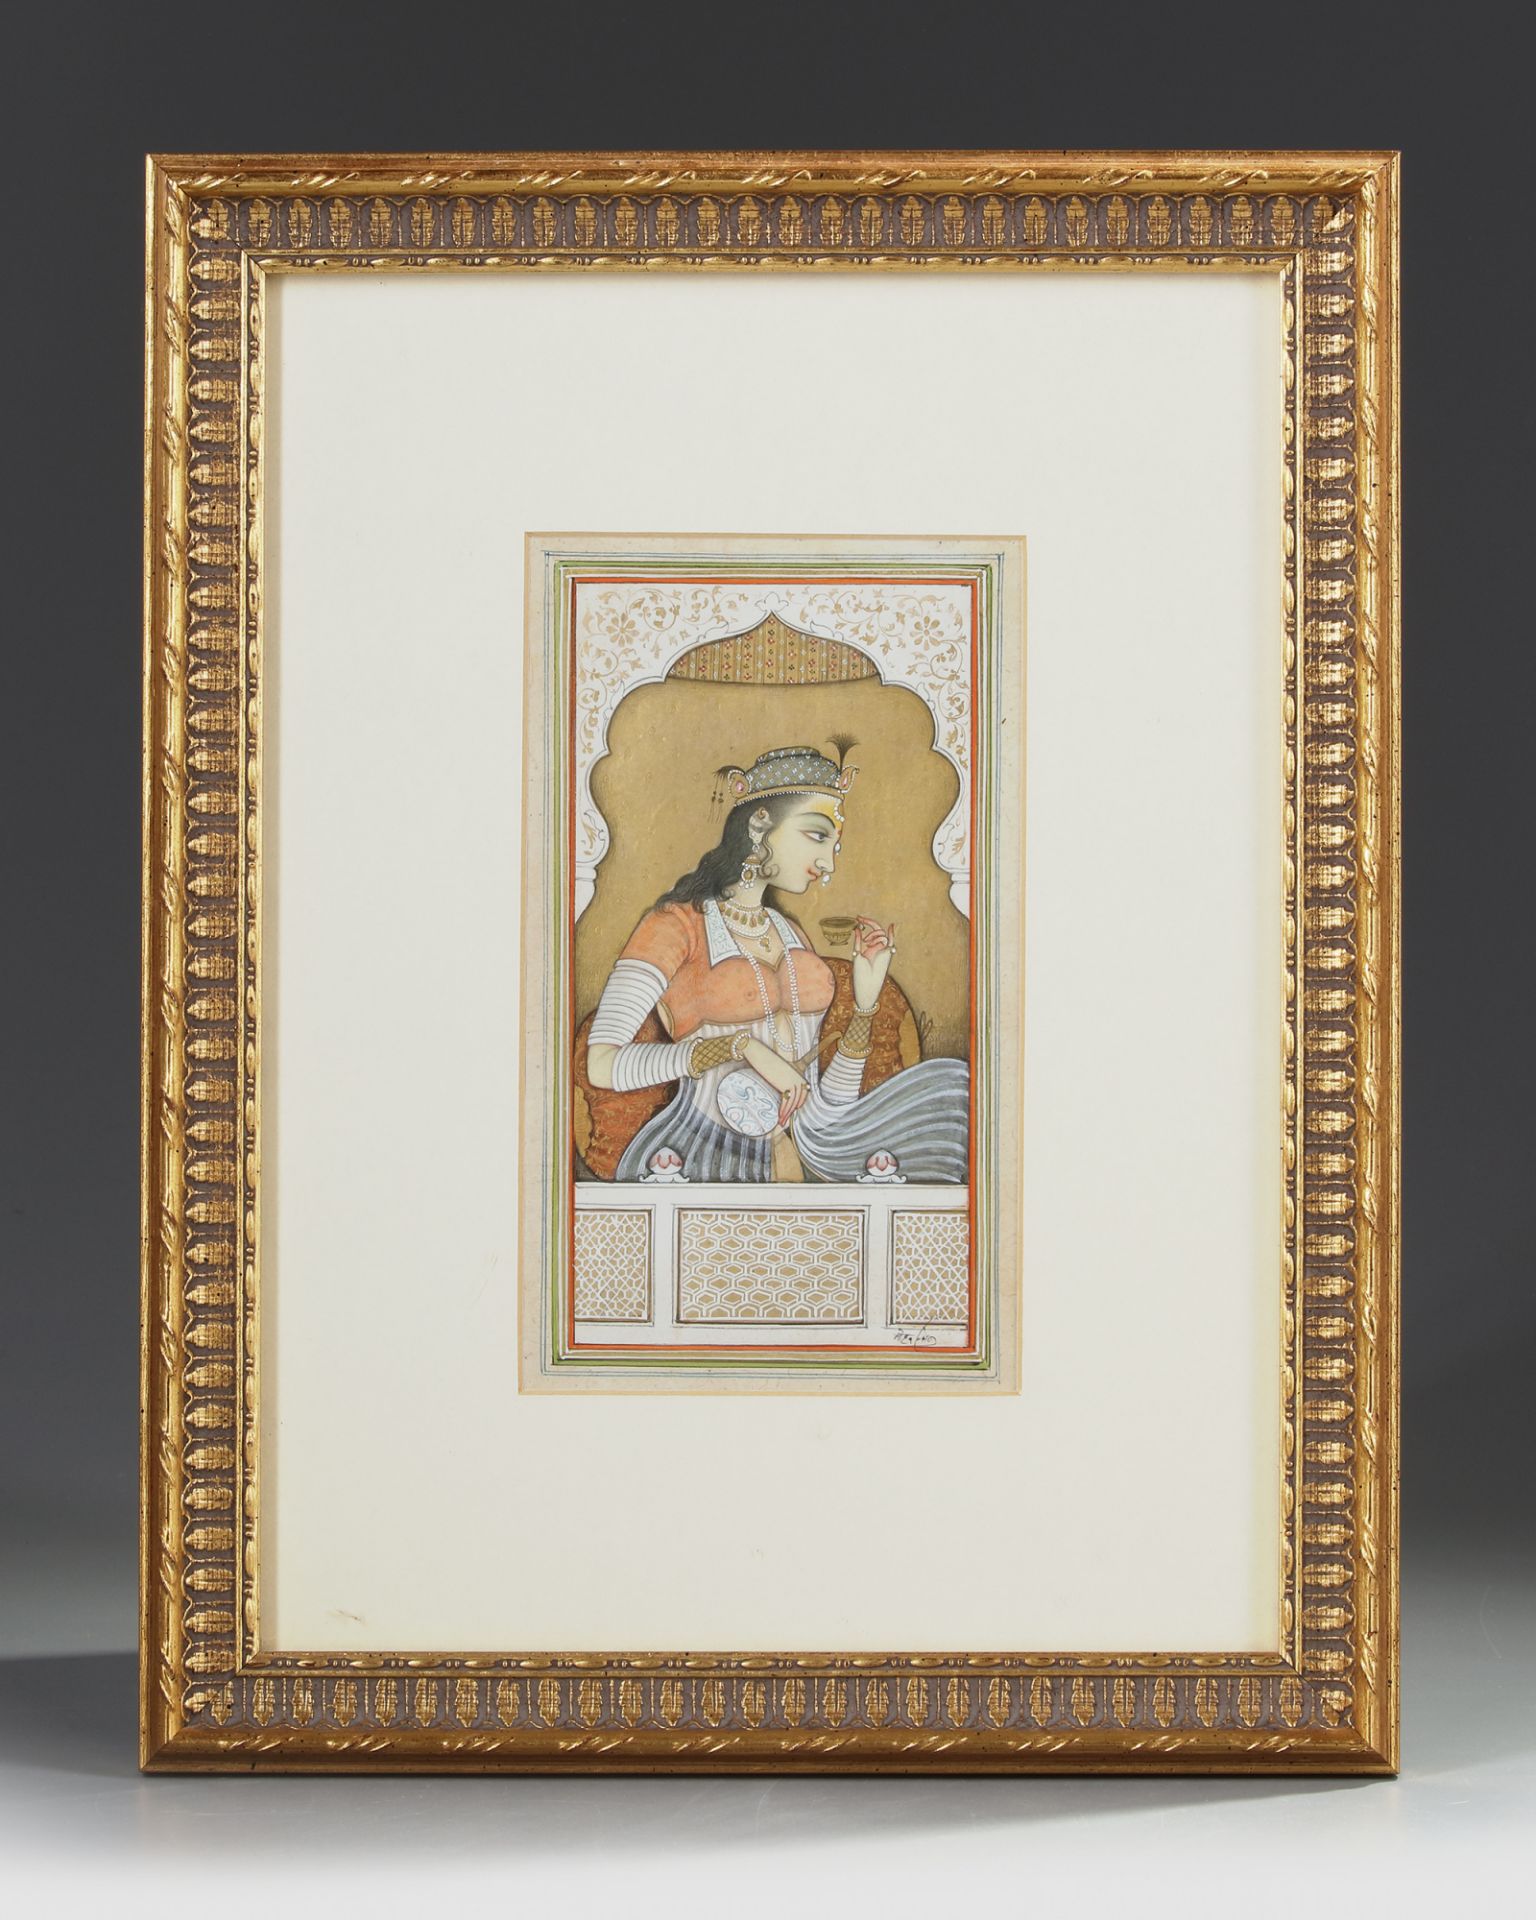 A PORTRAIT OF A MUGHAL LADY - Image 2 of 2